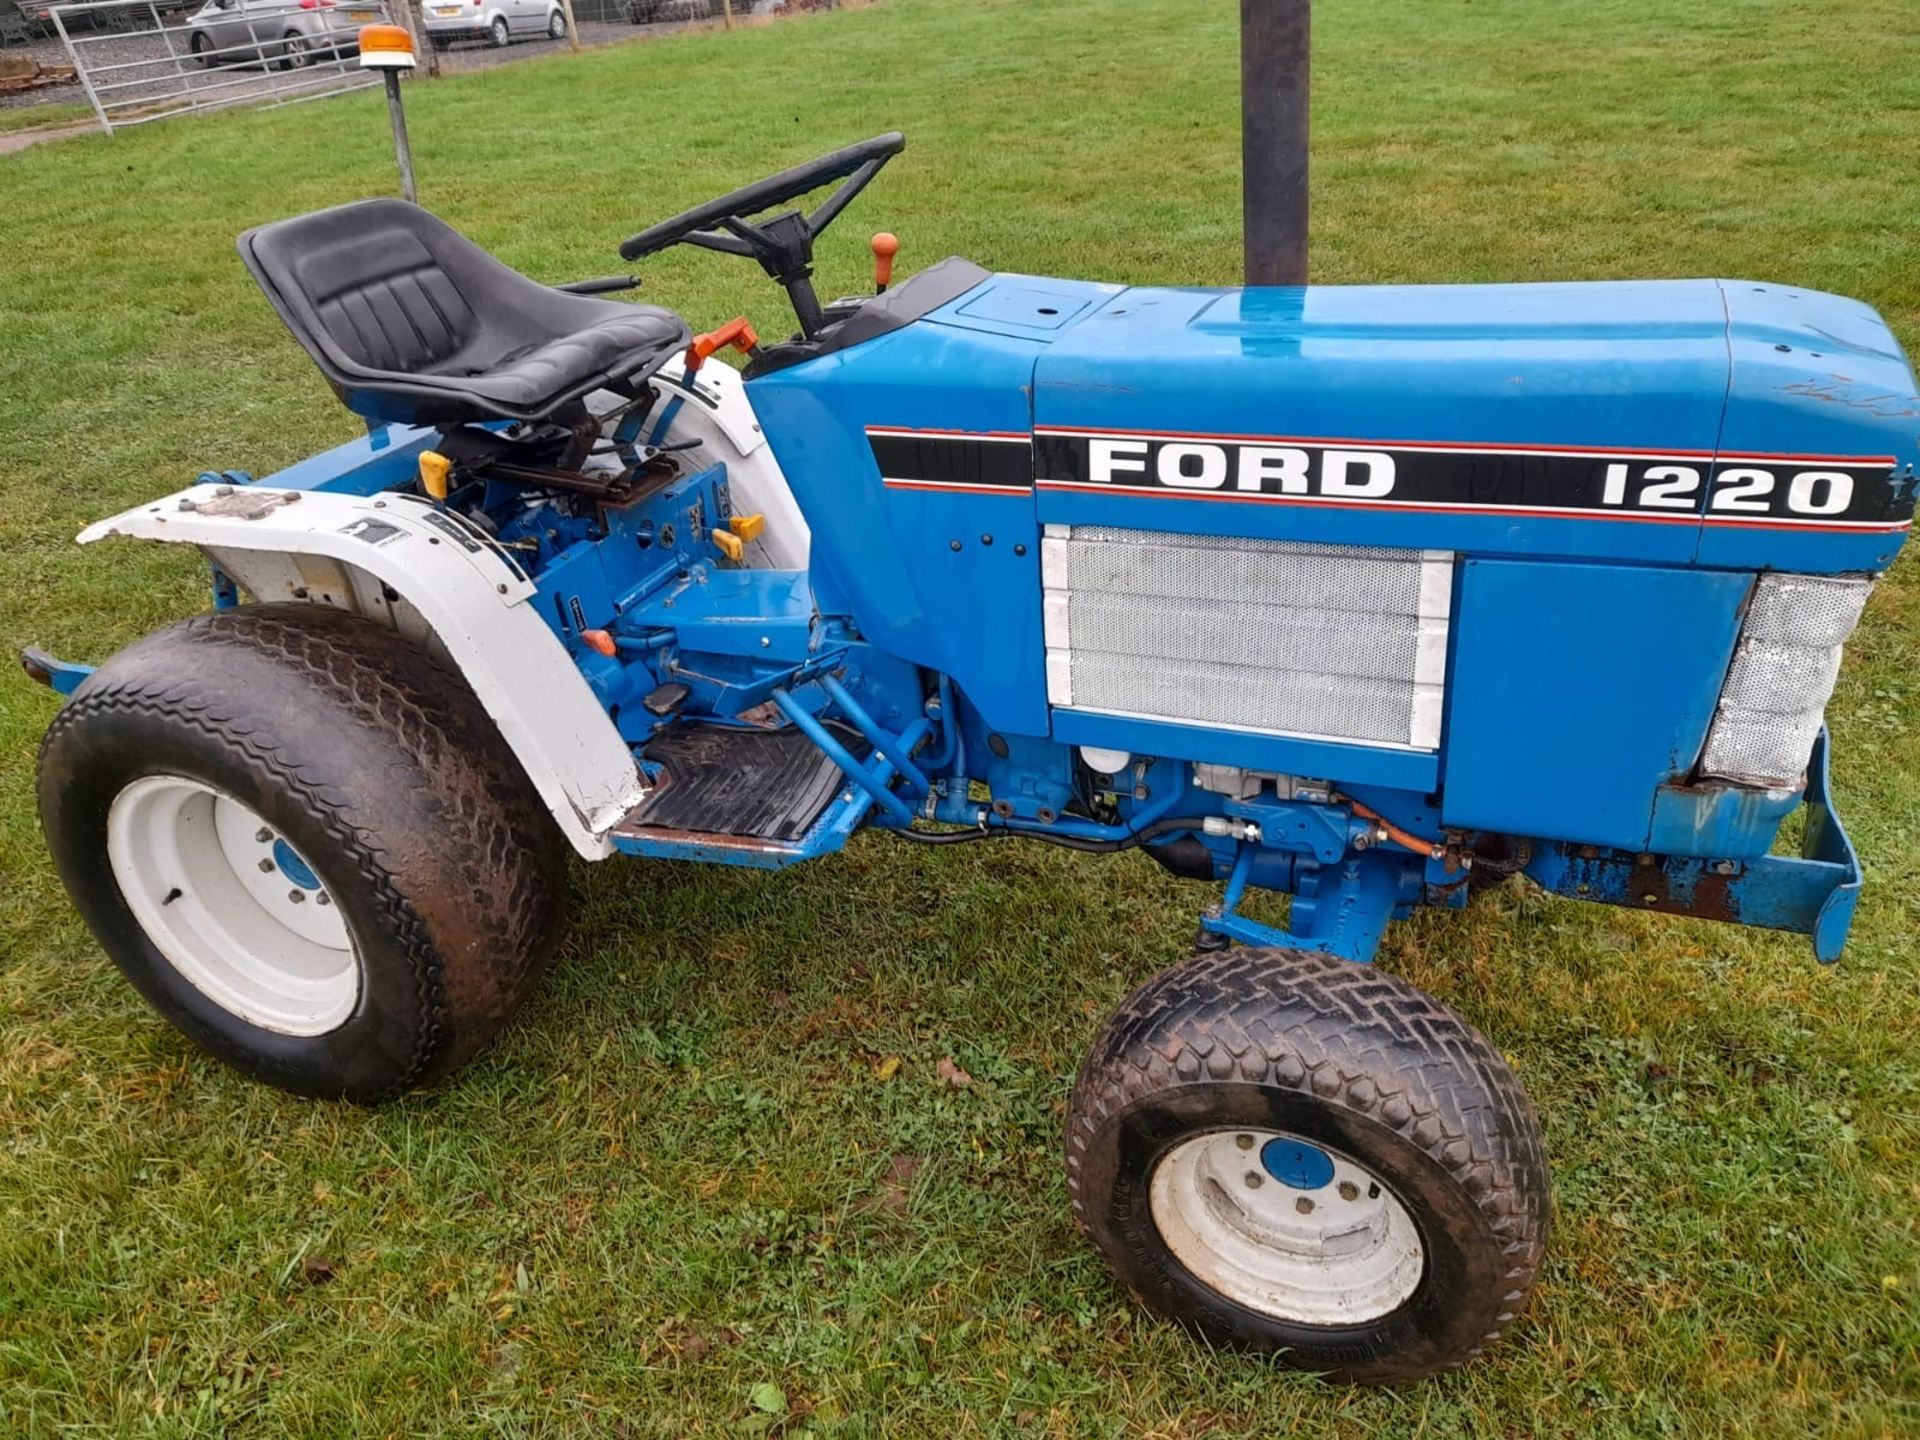 FORD 1220 COMPACT TRACTOR - GRASS TYRES